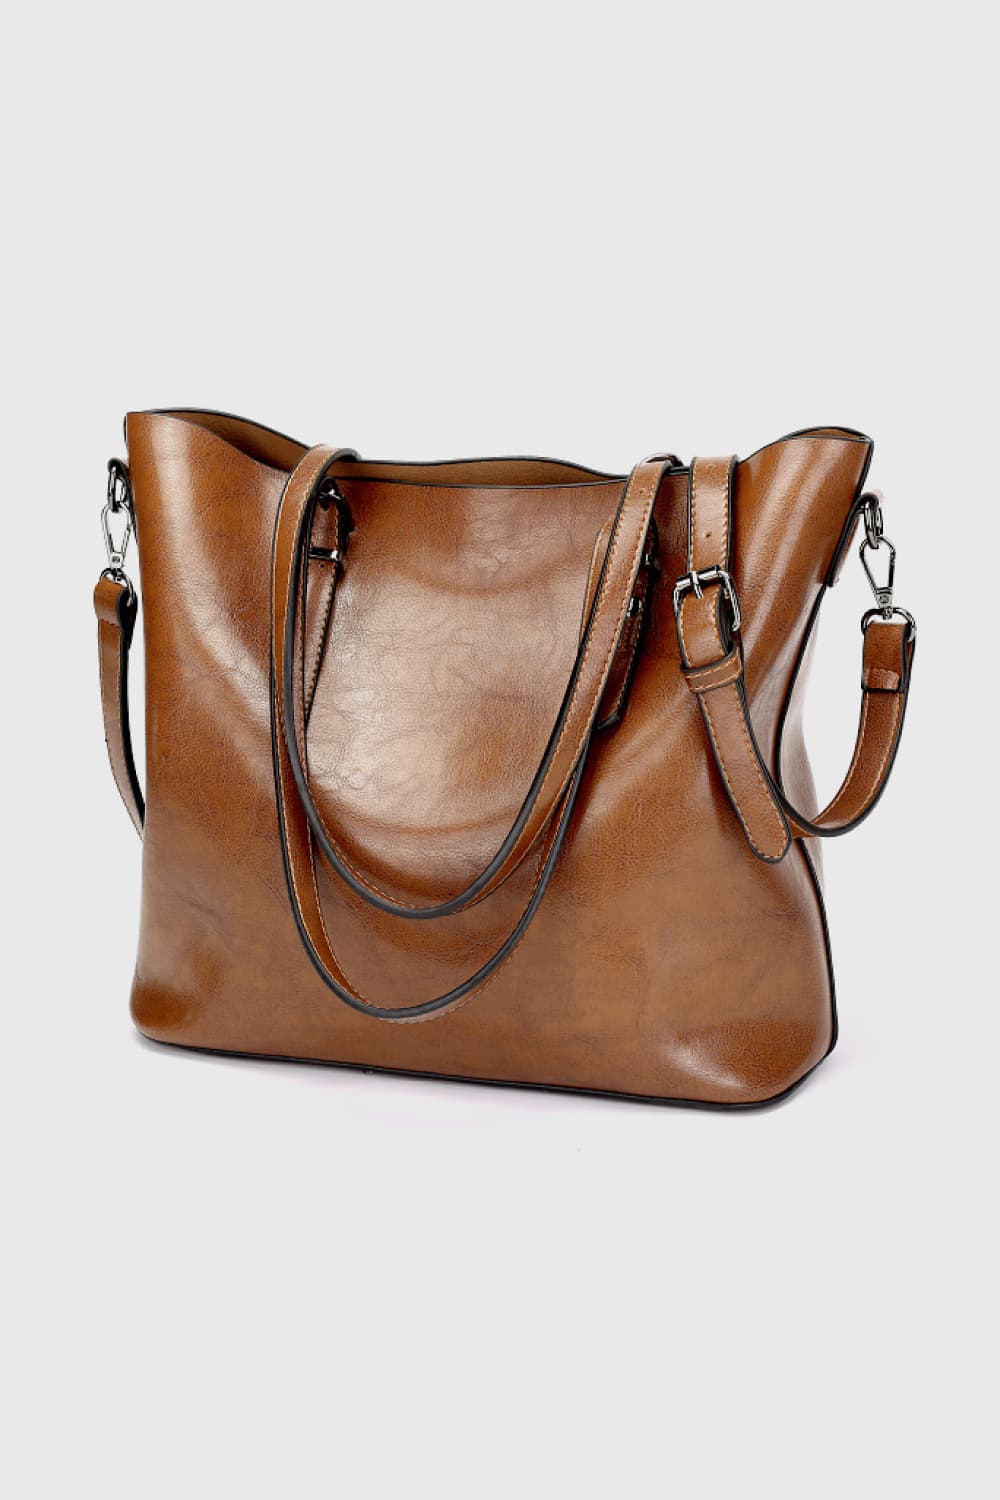 PU Leather Tote Bag for Ladies with Larger Space